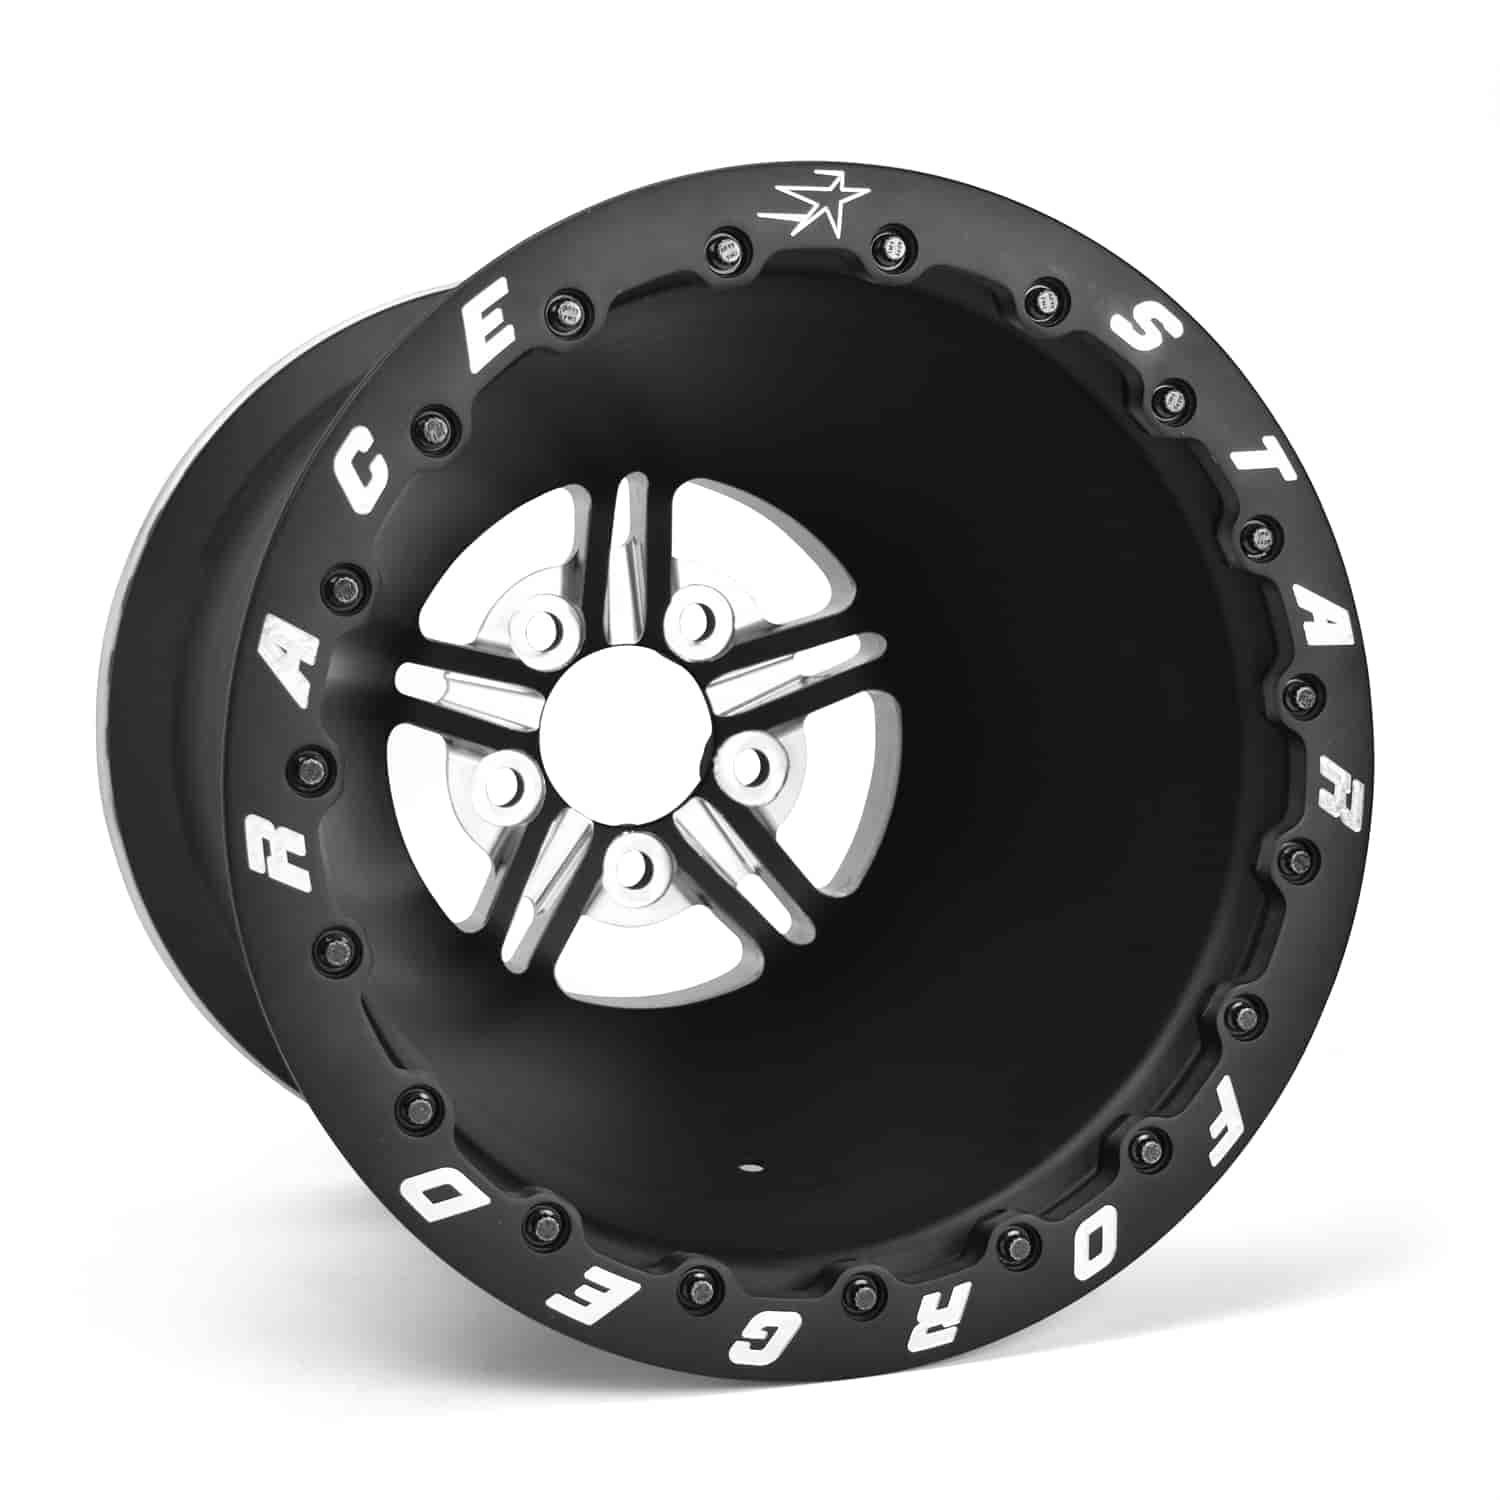 63-Series Pro Forged Double Bead-Lock Wheel Size: 15